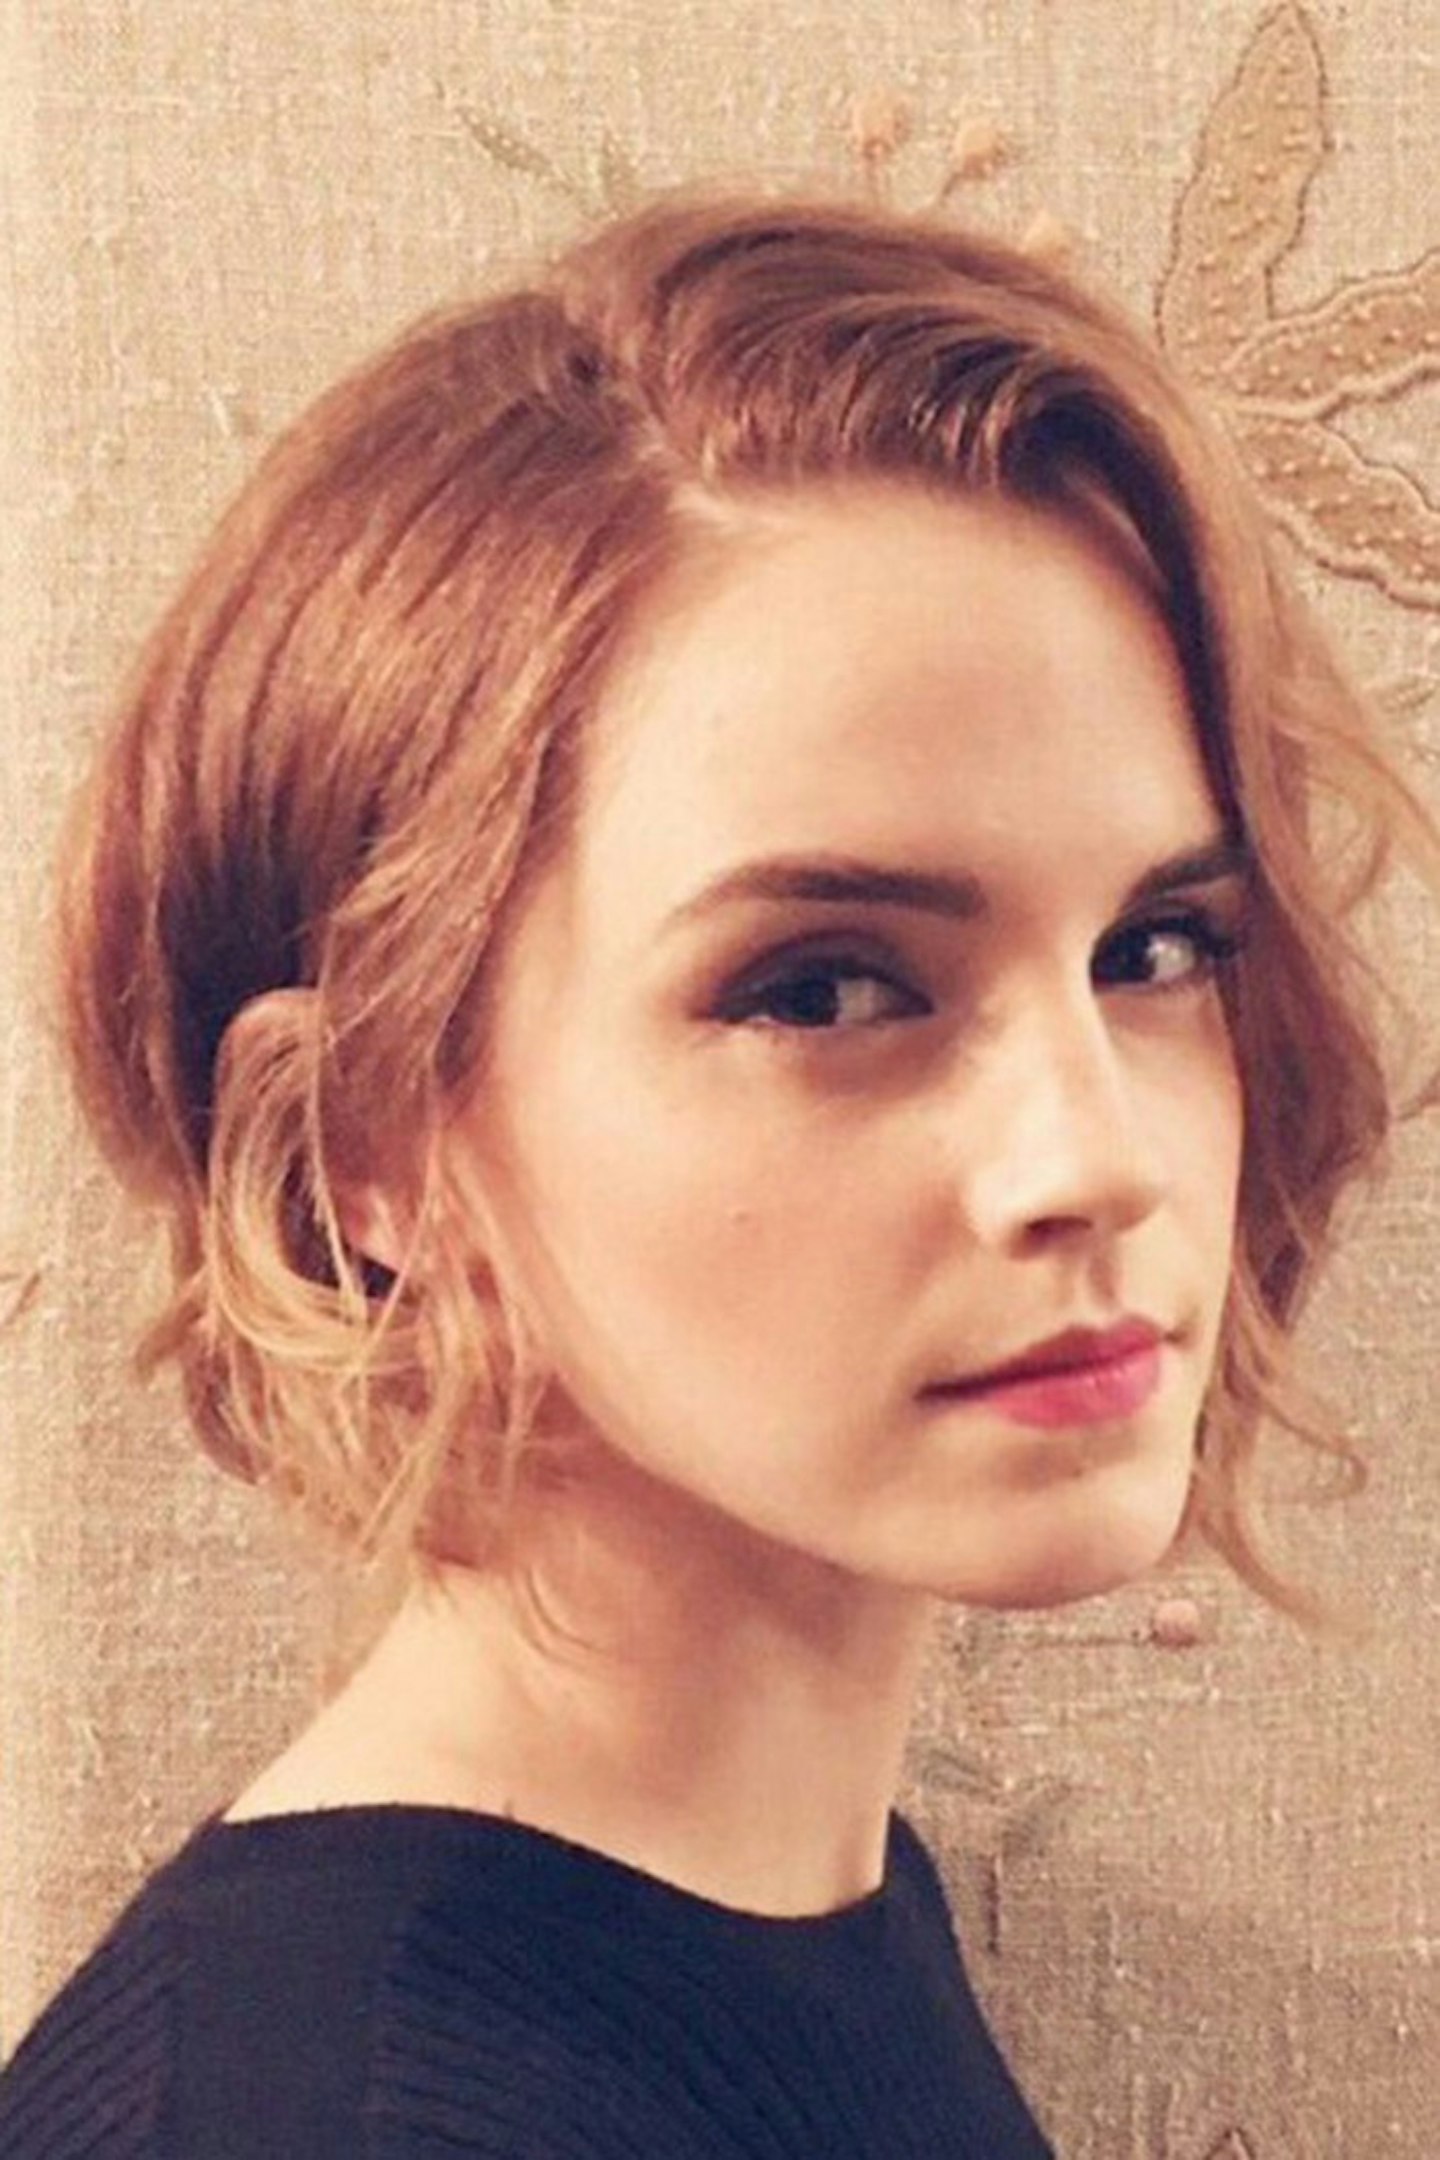 emma-watson-just-chopped-off-her-hair-1588283-1449611916.640x0c